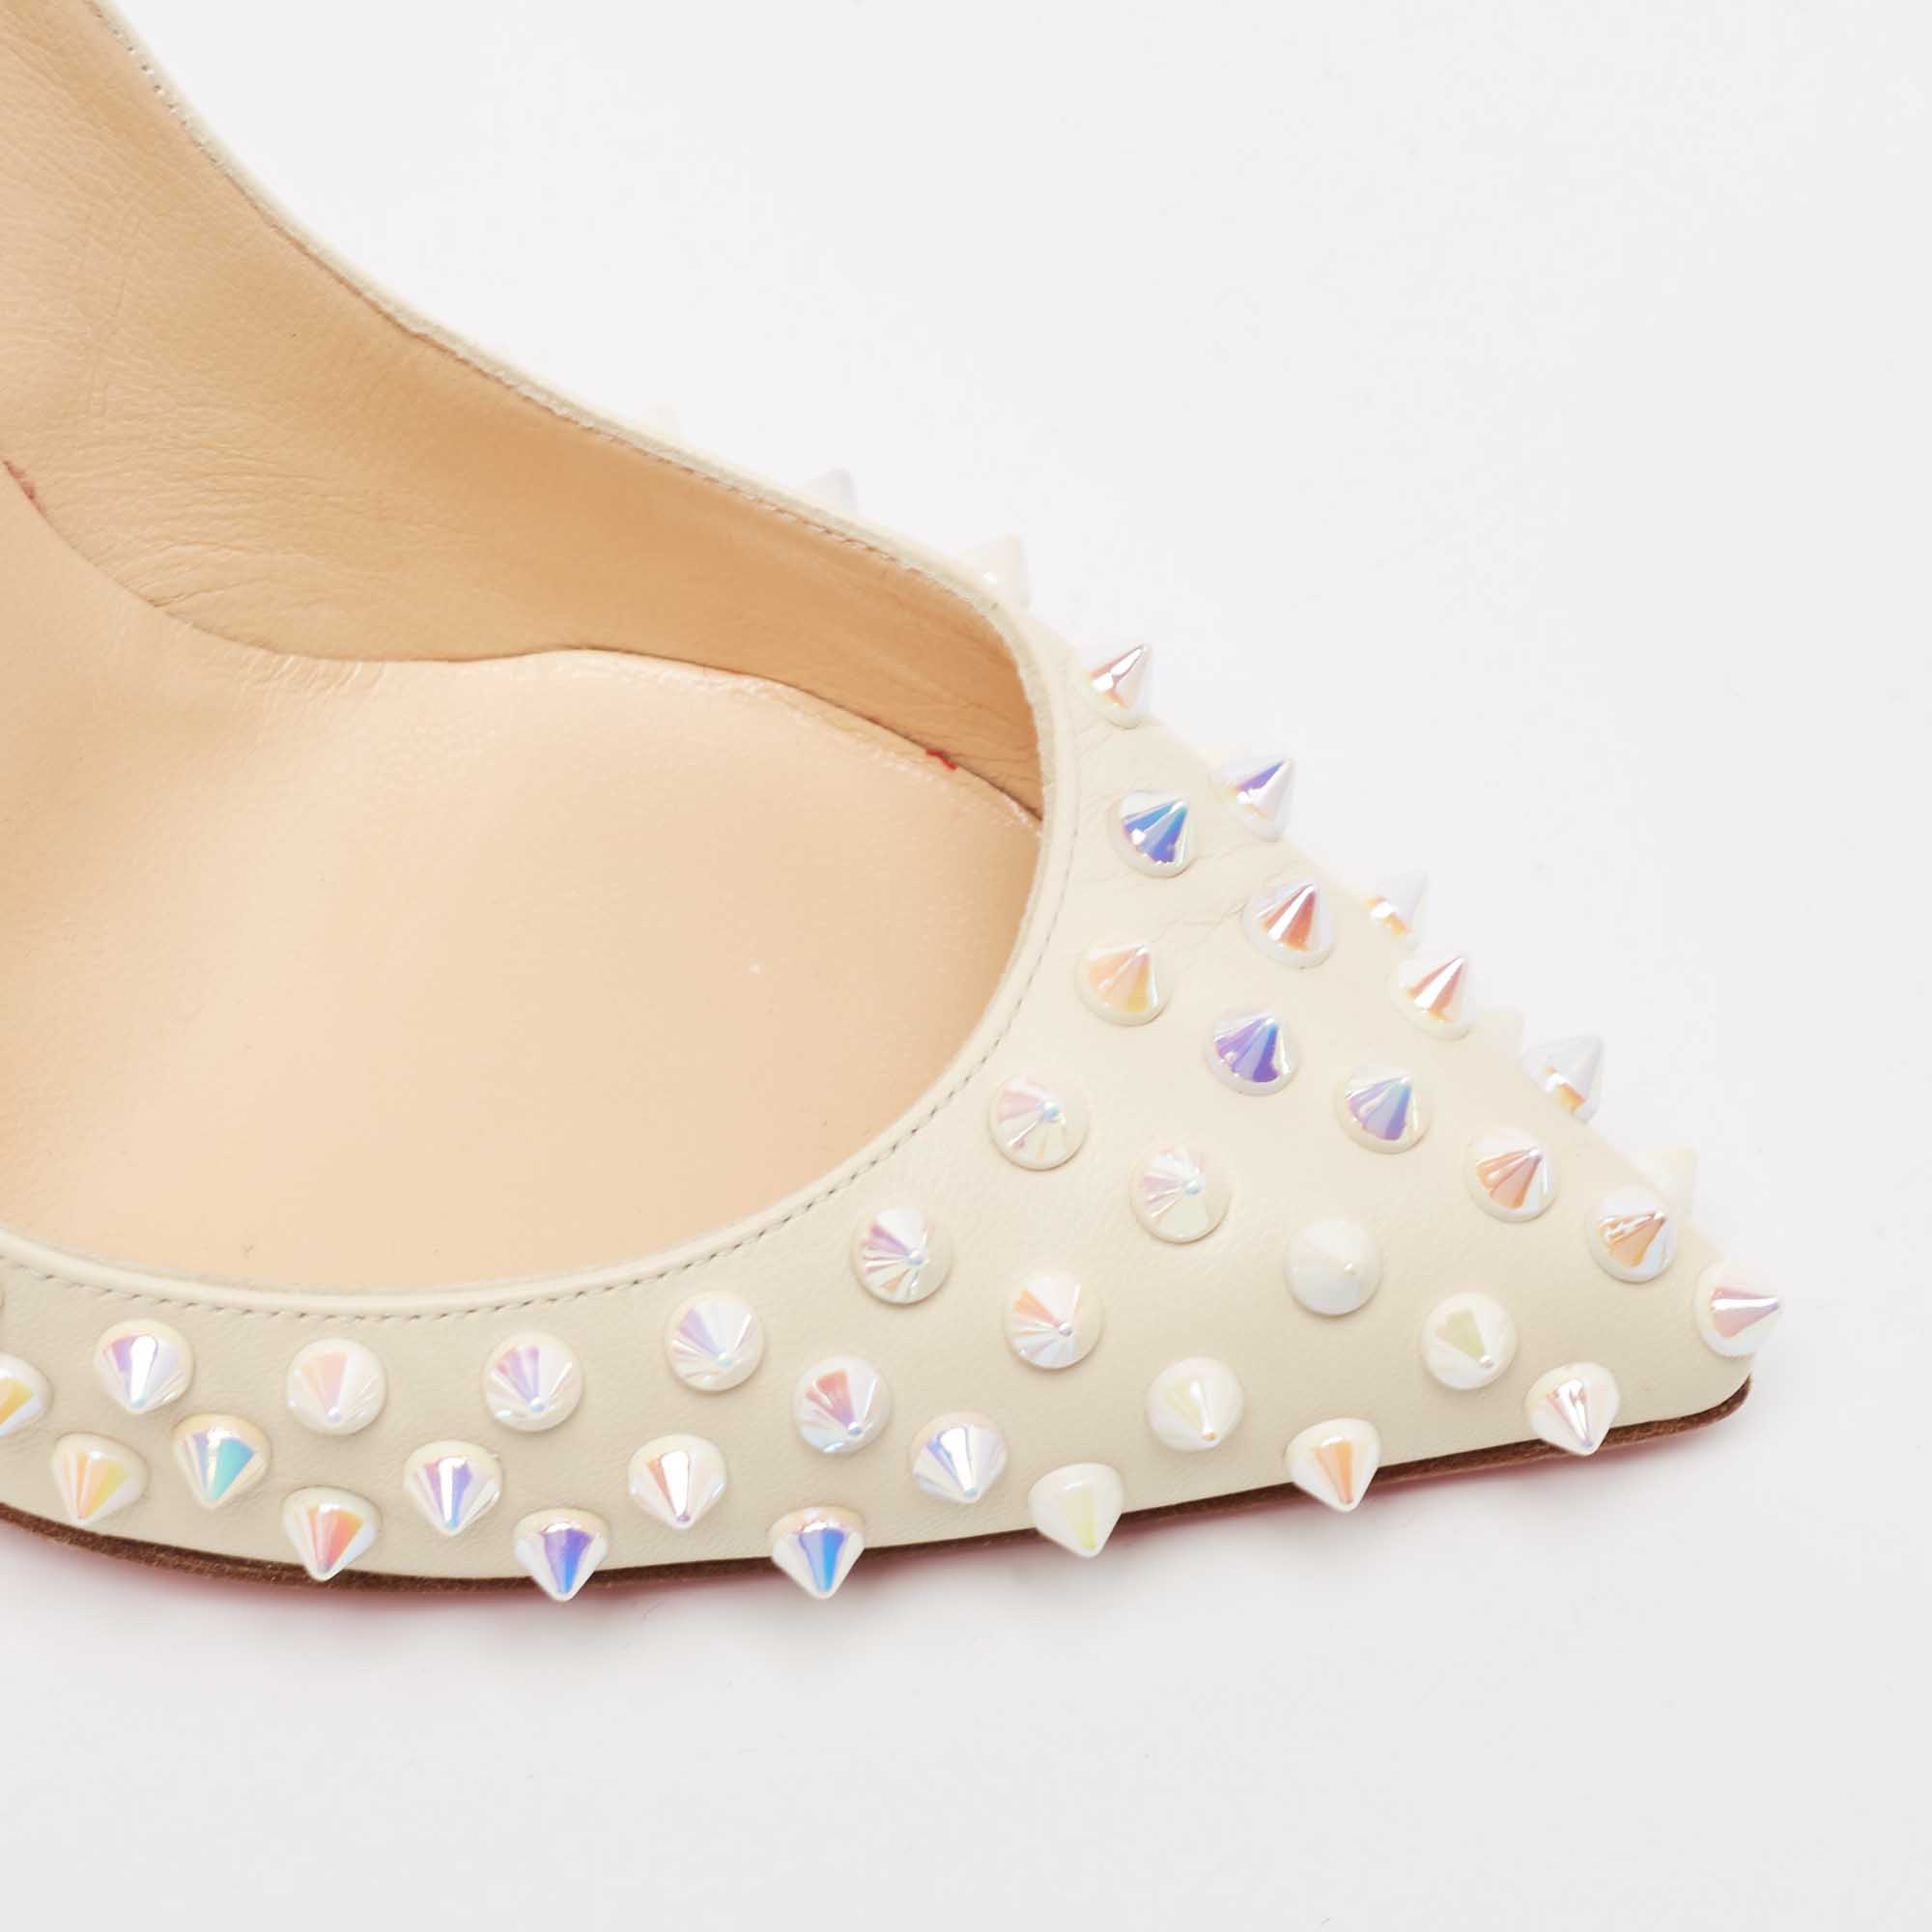 Christian Louboutin Cream Leather Follies Spikes Pointed Toe Pumps Size 38